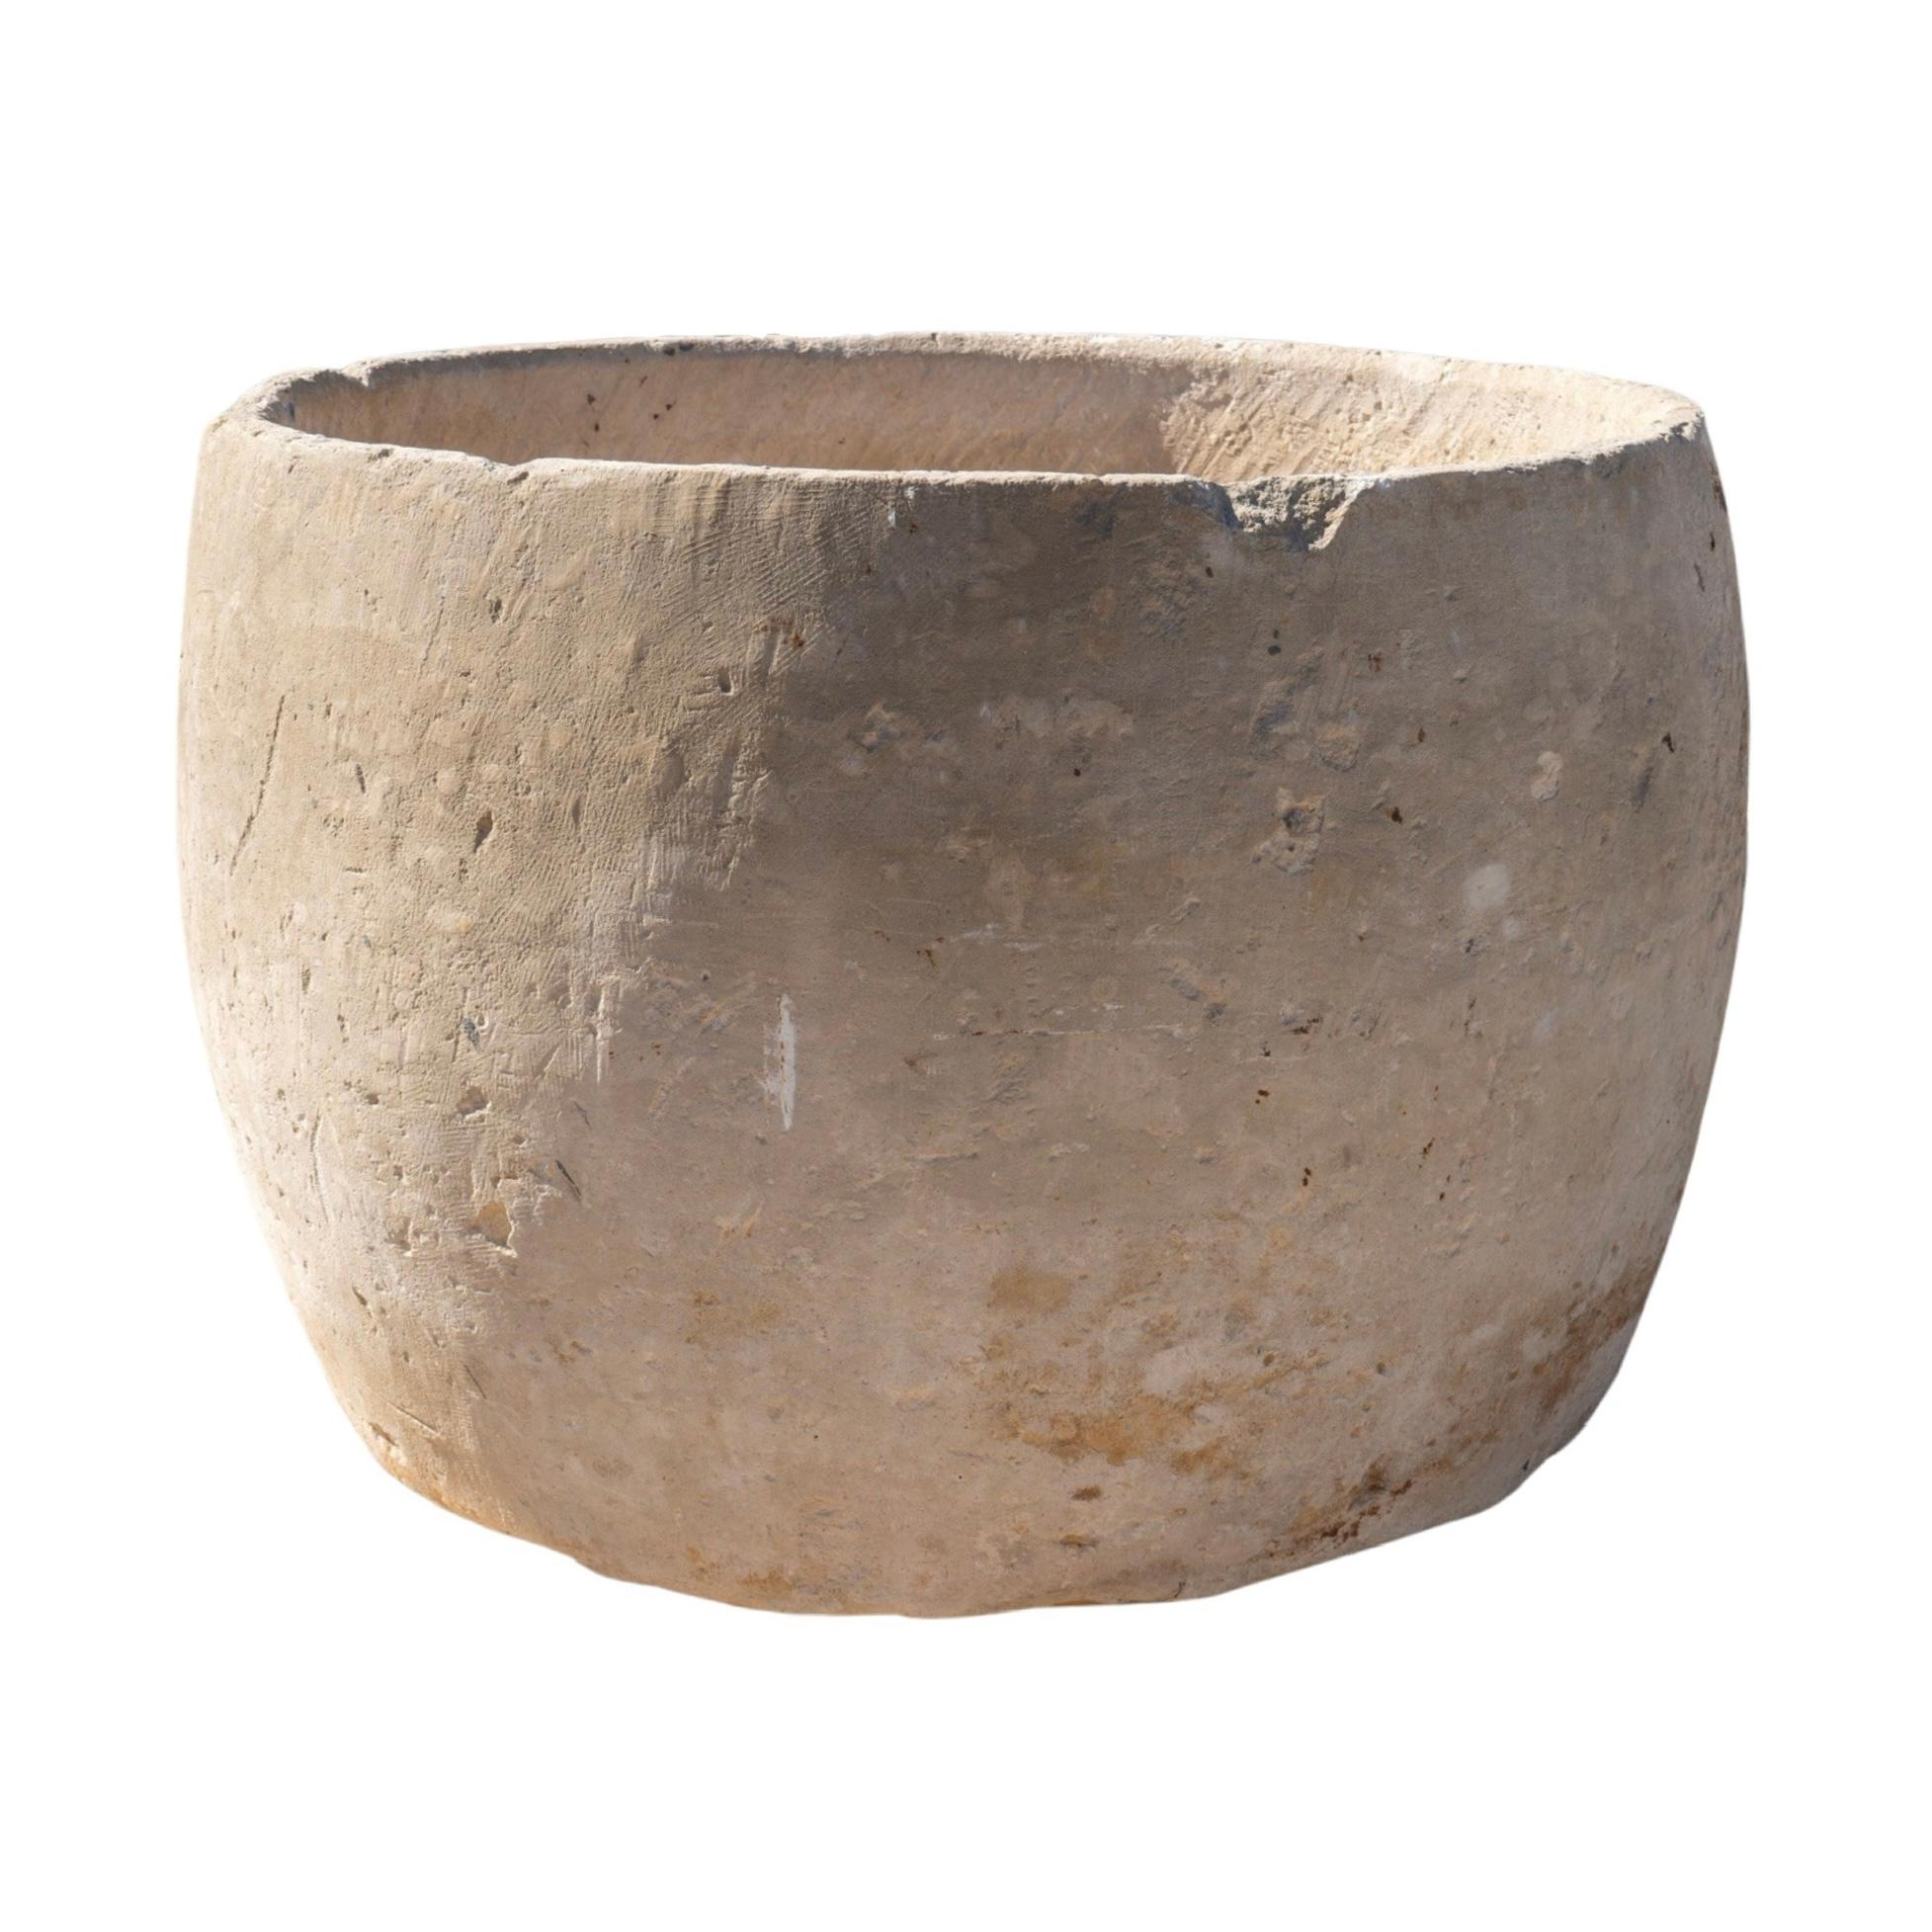 Expertly crafted in France in the 1880s, this circular planter features a classic round style and is made from beautiful burgundy limestone. Bring elegance and sophistication to your garden or patio with this timeless piece.